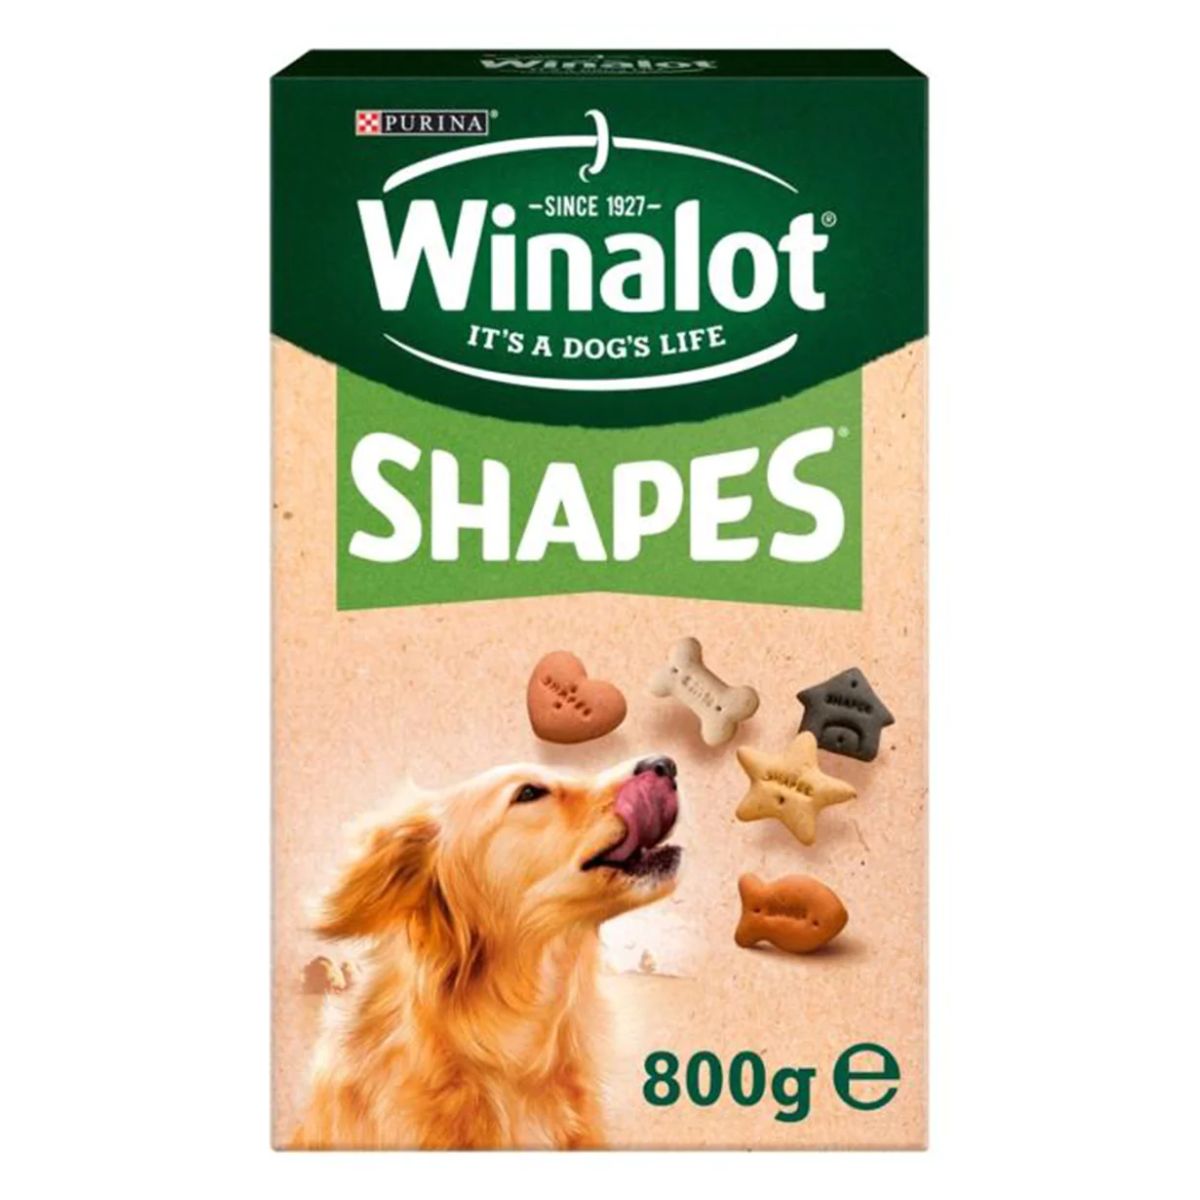 A box of Purina Winalot - Shapes Biscuits - 800g with an image of a golden retriever catching a biscuit.